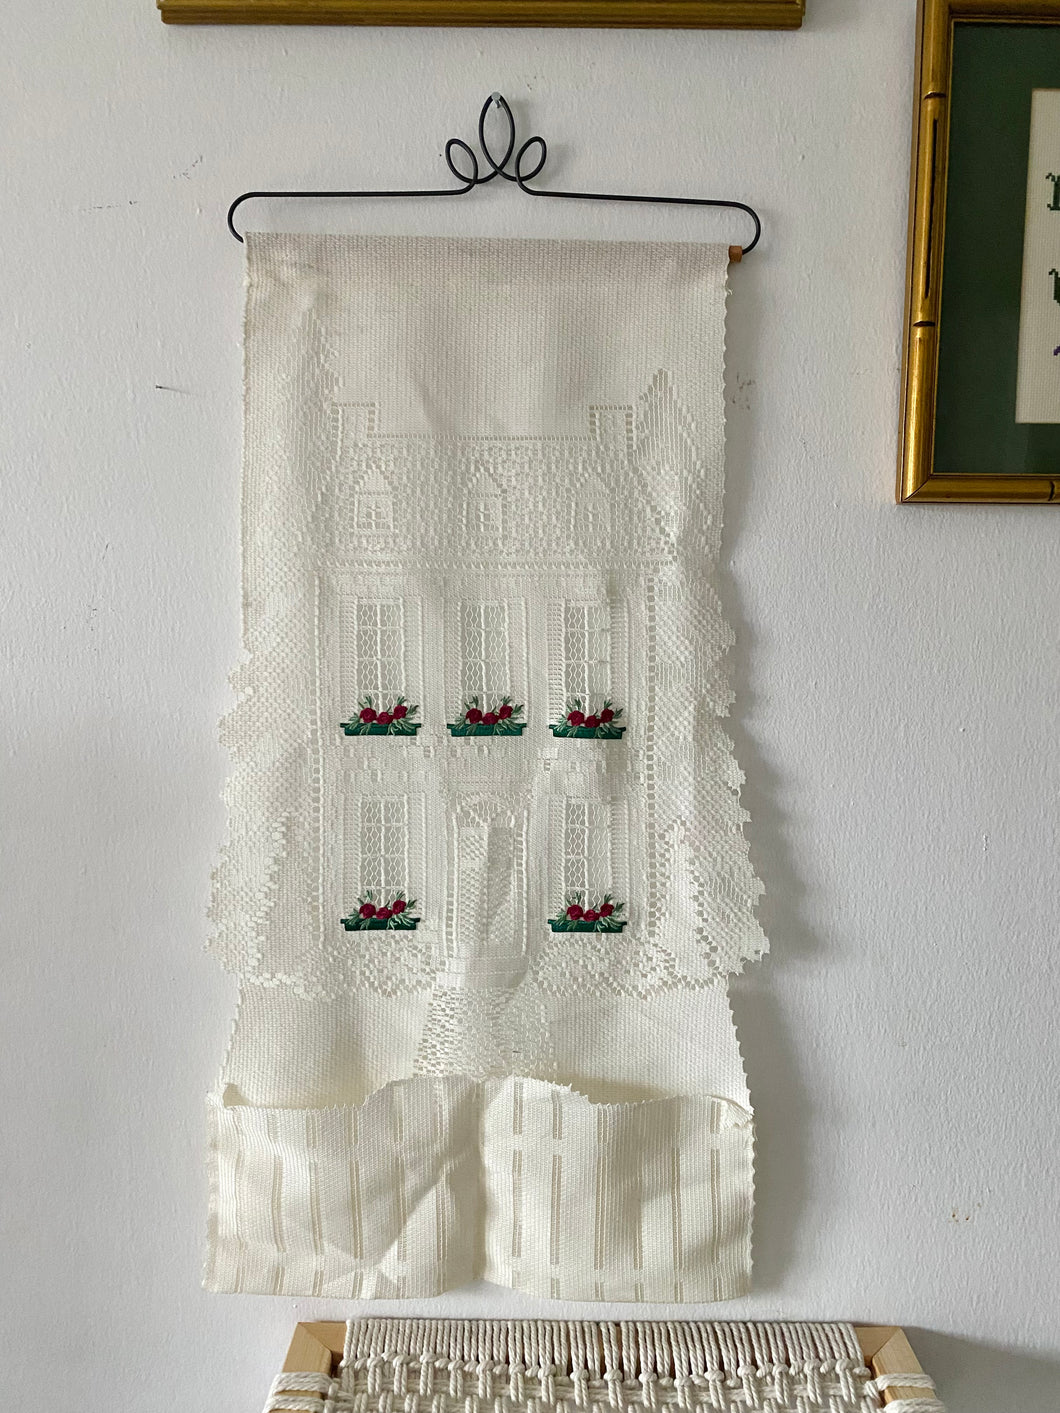 Vintage Embroidered Lace Mail Holder Wall Hanging